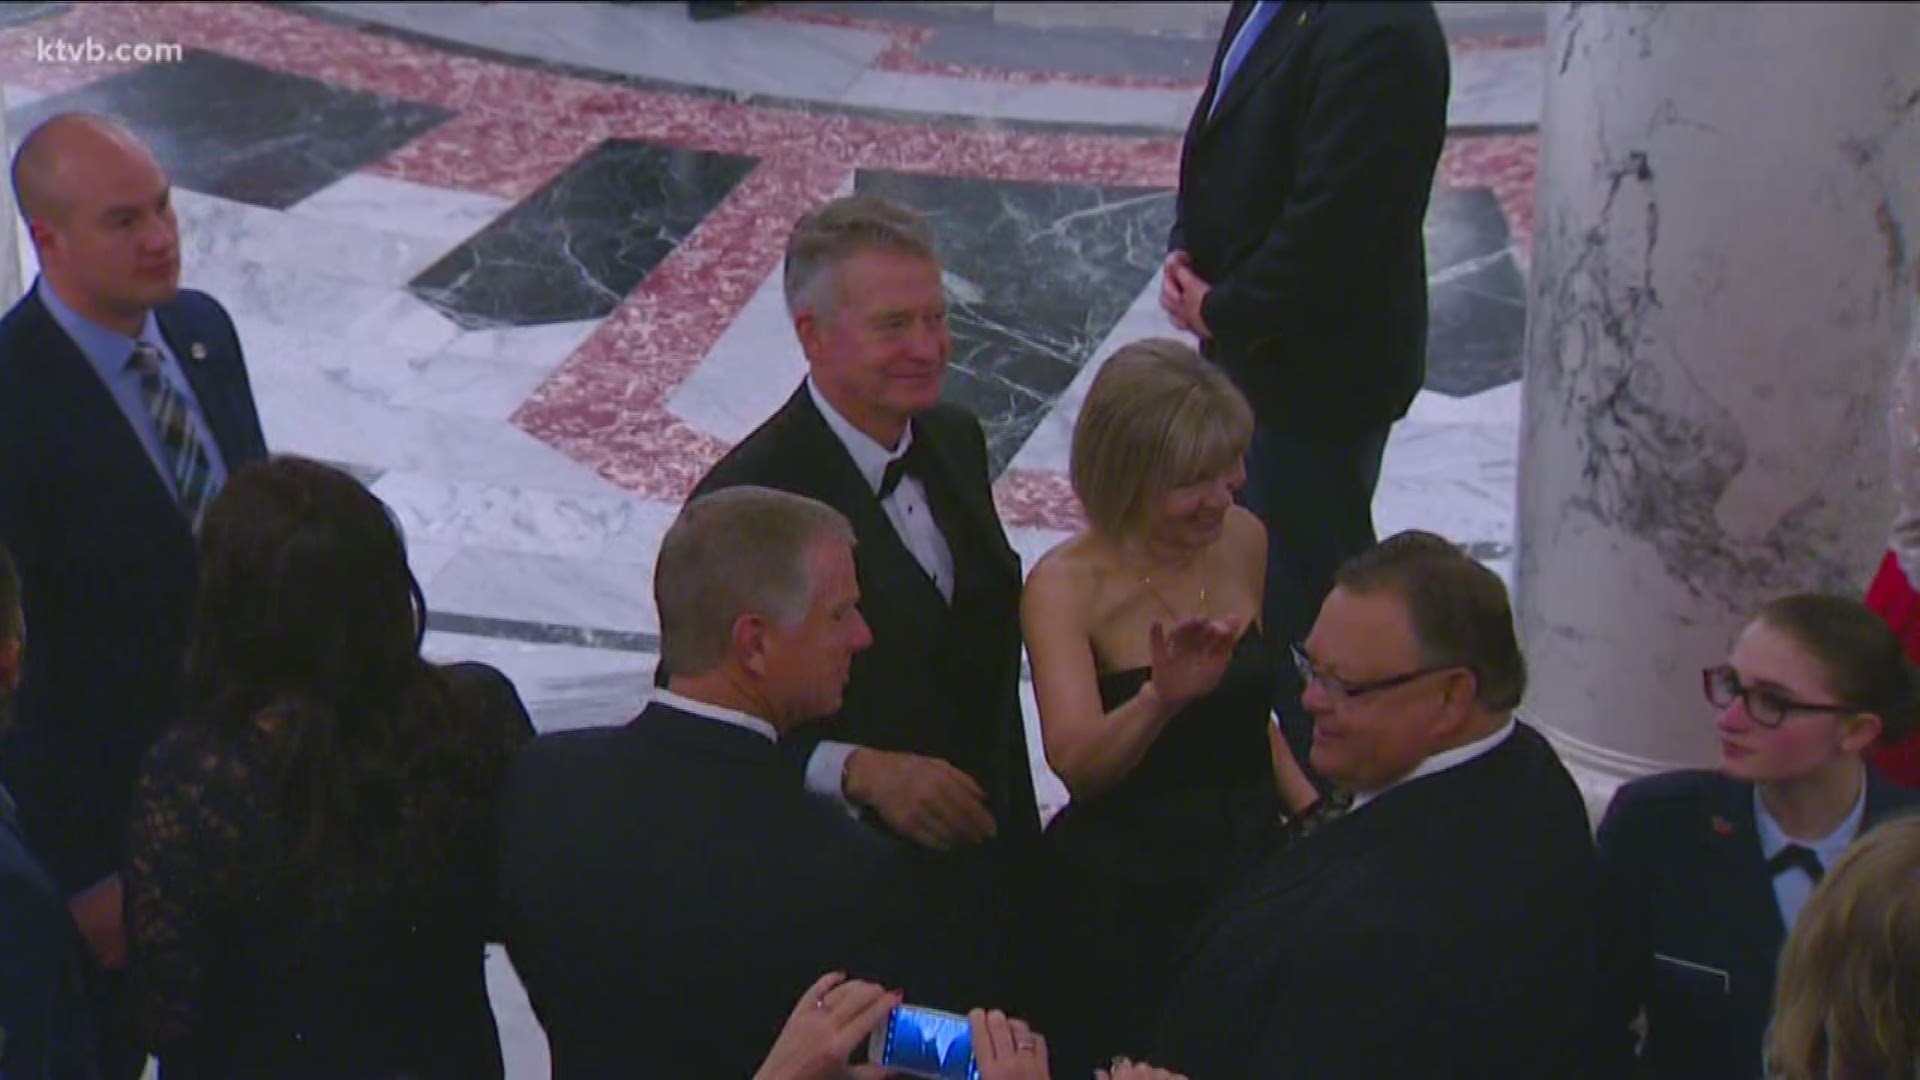 Gov. Little mingled with distinguished guests at Saturday's Inauguration Ball, where state leaders welcomed and celebrated Idaho's newest governor.